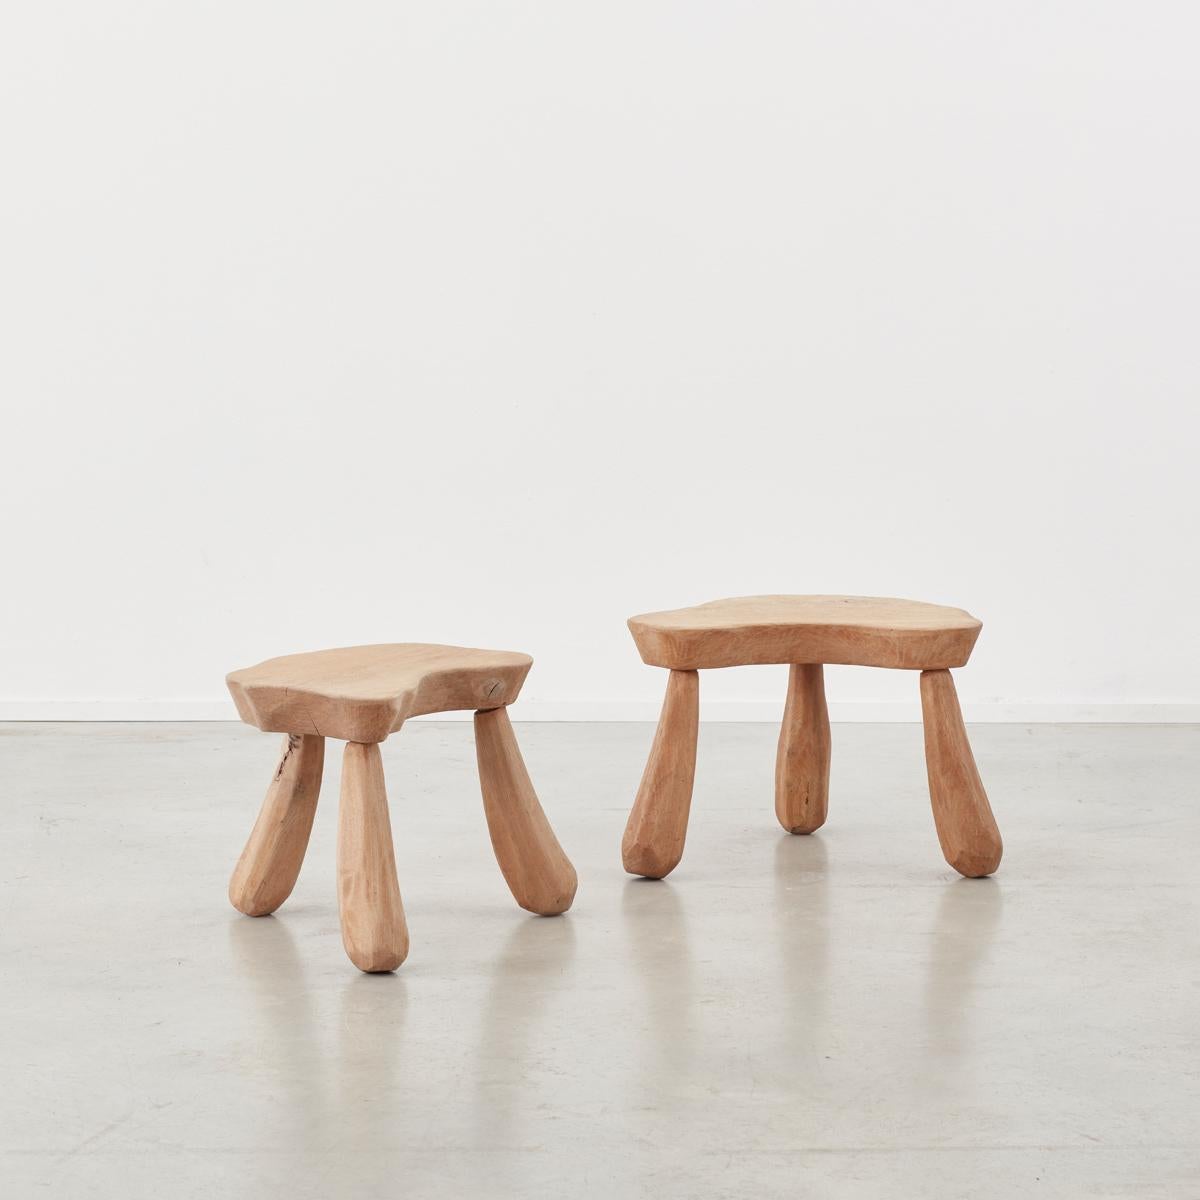 Hand-Carved Provincial Wooden Stools/Tables France, Late 20th Century